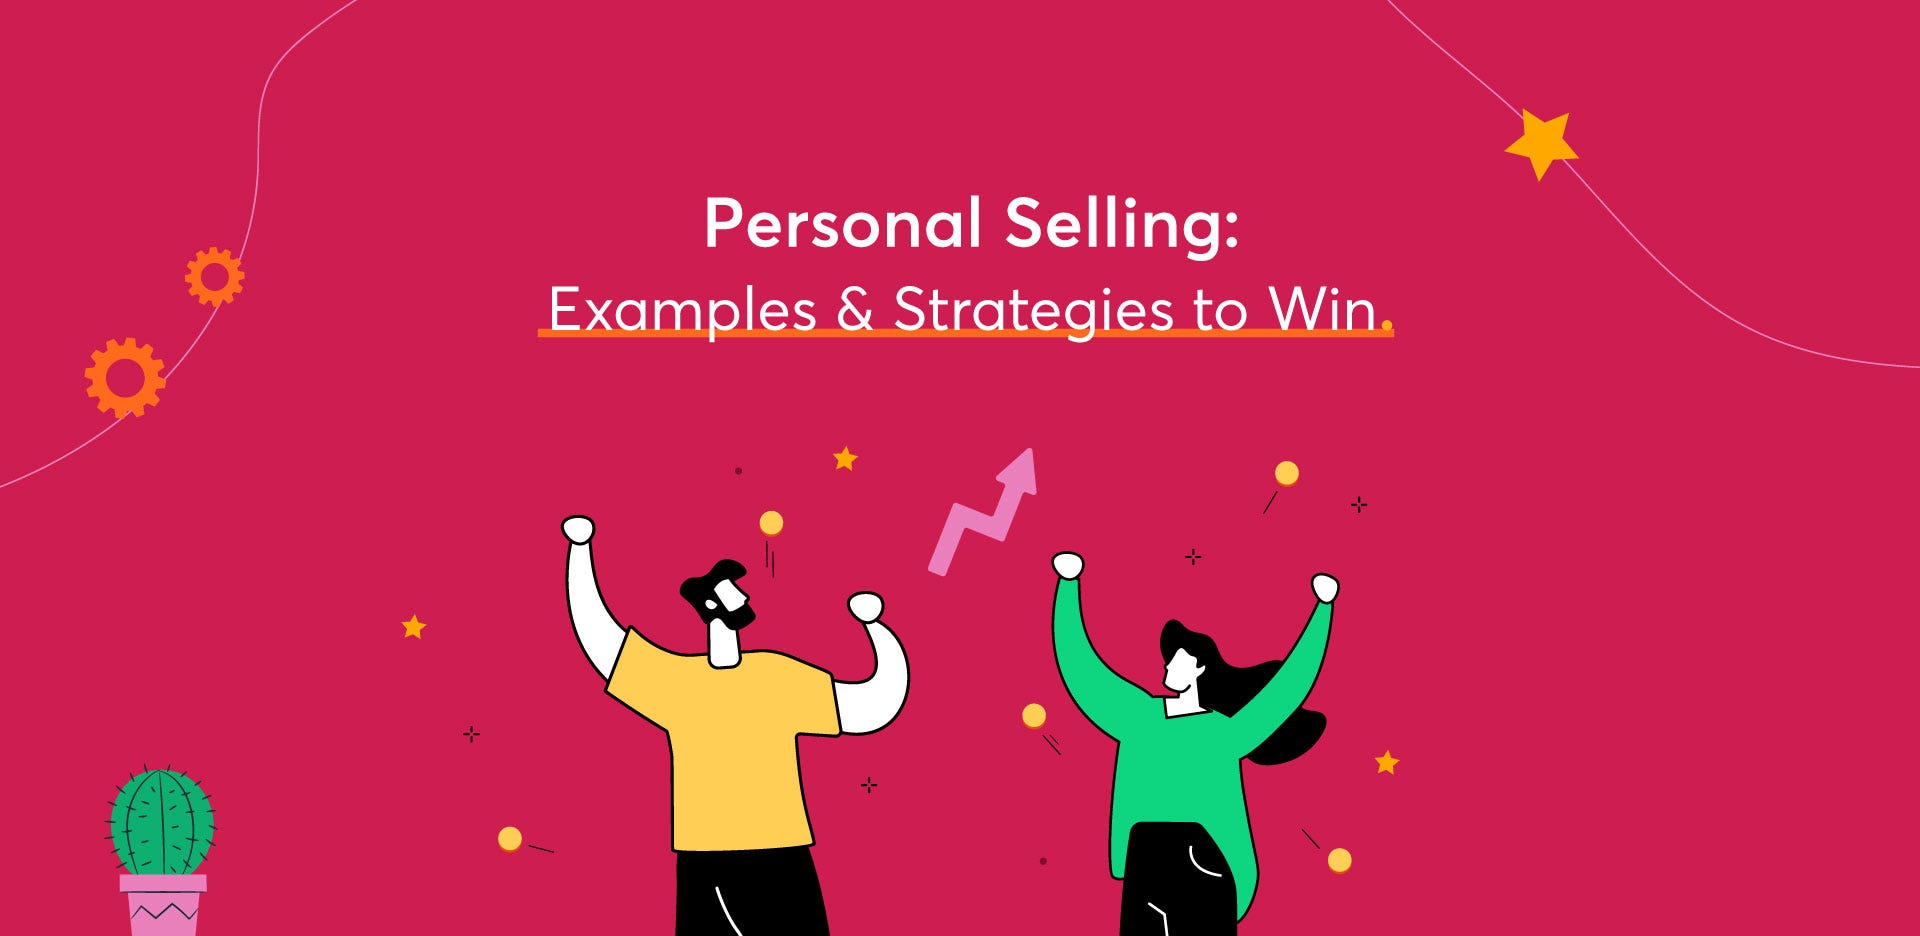 <div>Personal Selling: Examples & Strategies to Win</div>